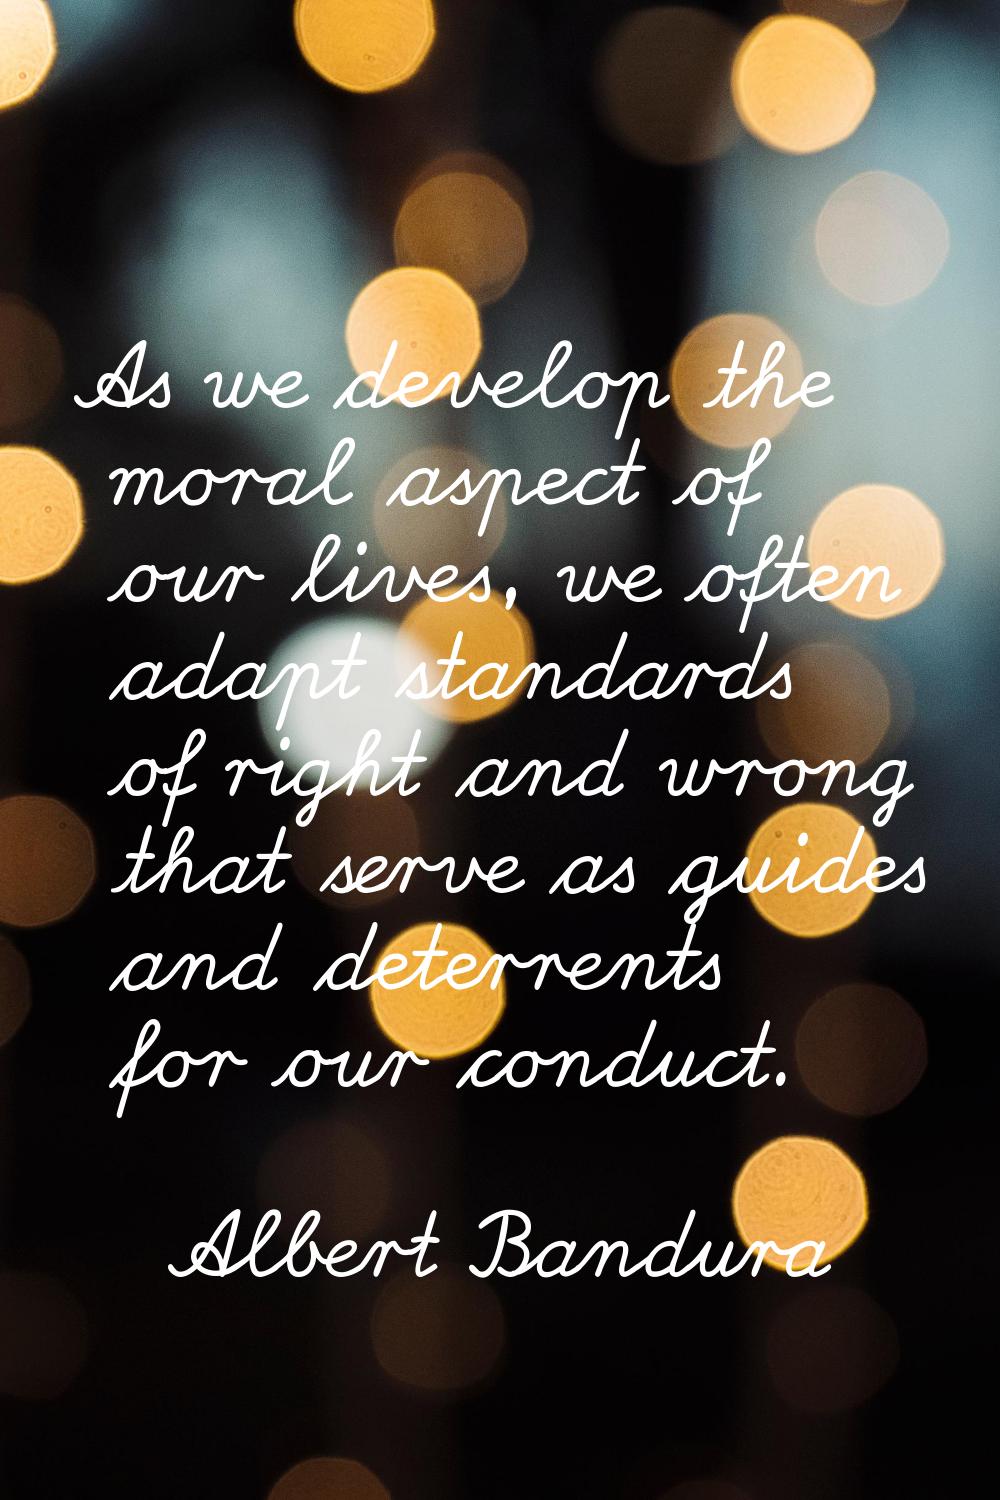 As we develop the moral aspect of our lives, we often adapt standards of right and wrong that serve